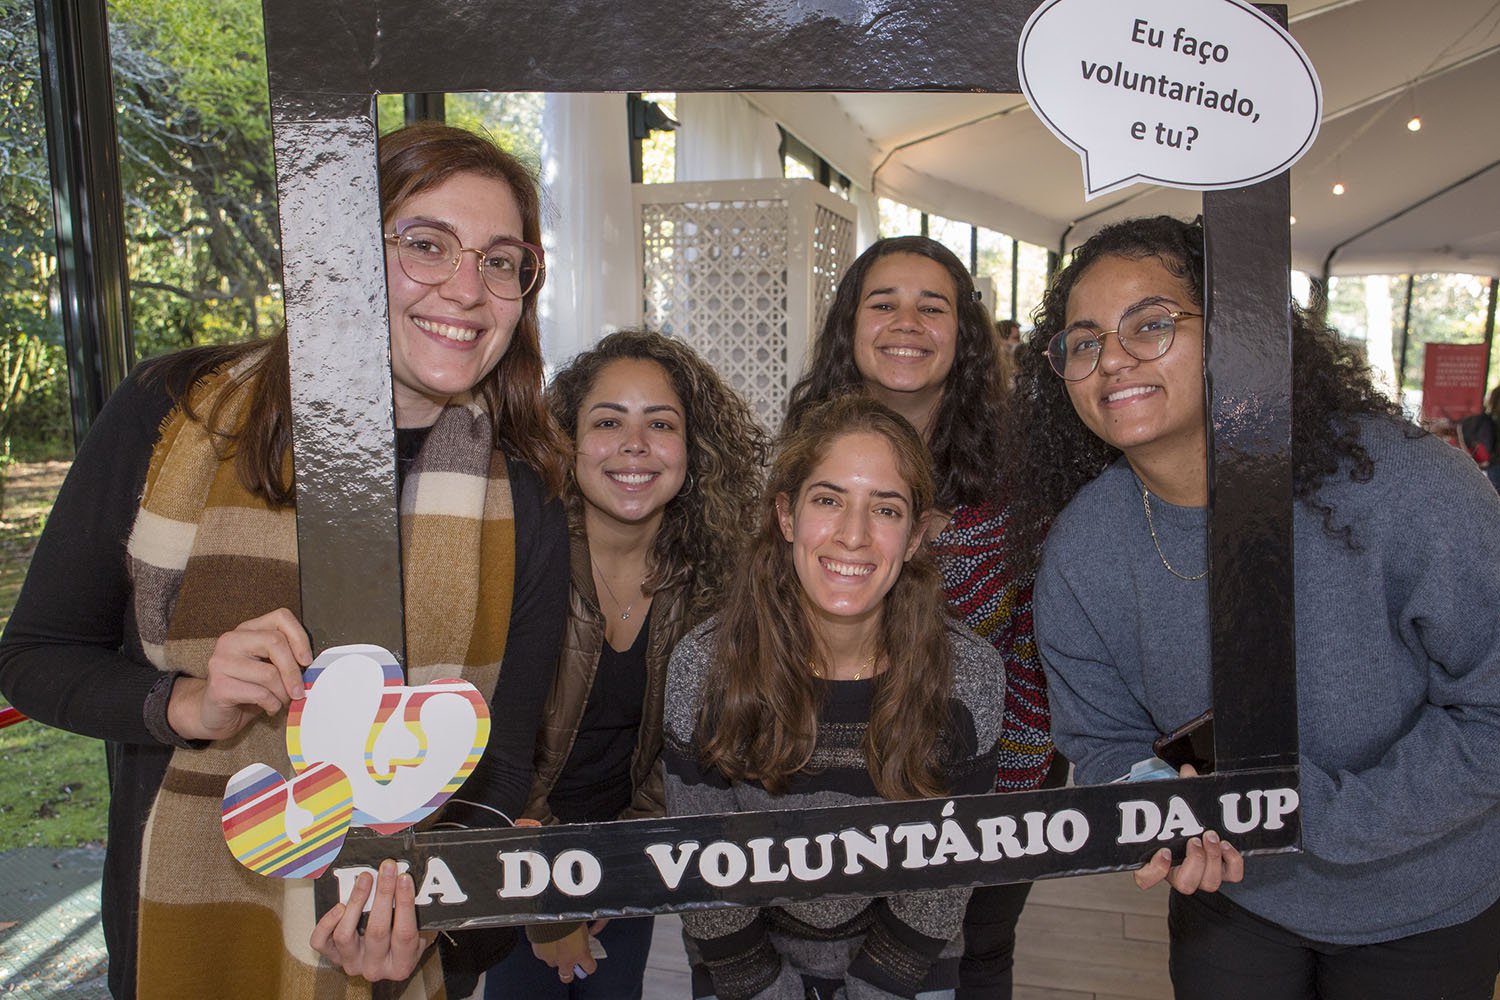 Five students who volunteer pose for a photo on Volu